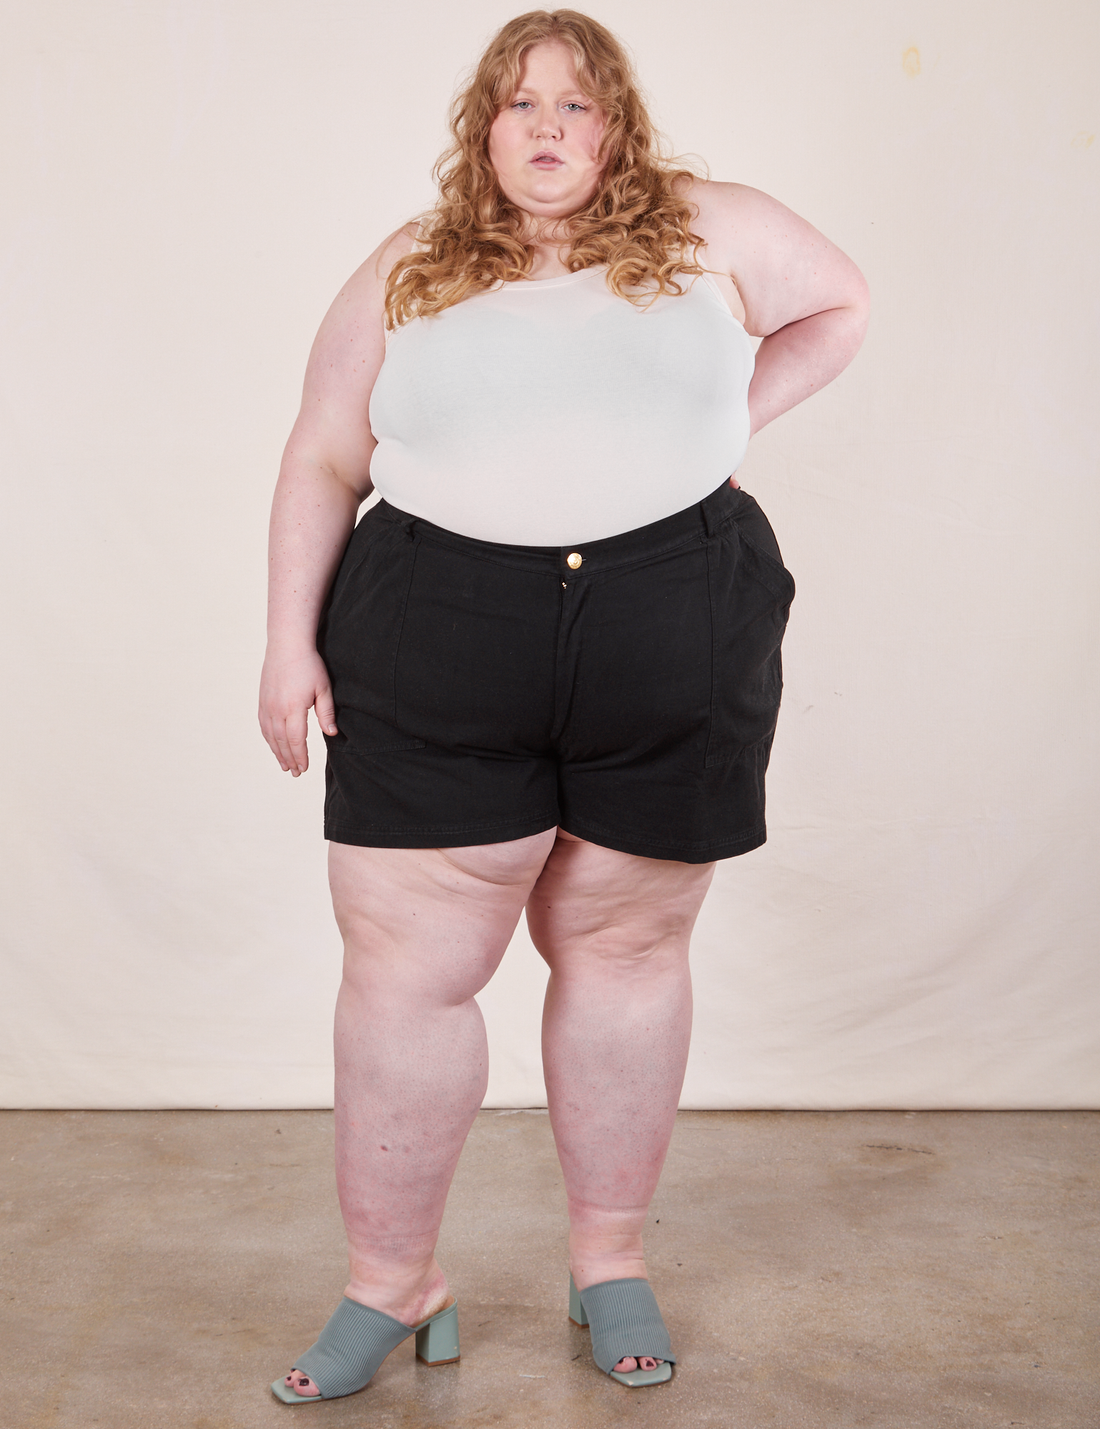 Catie is 5'11" and wearing size 5XL Classic Work Shorts in Basic Black paired with vintage off-white Tank Top